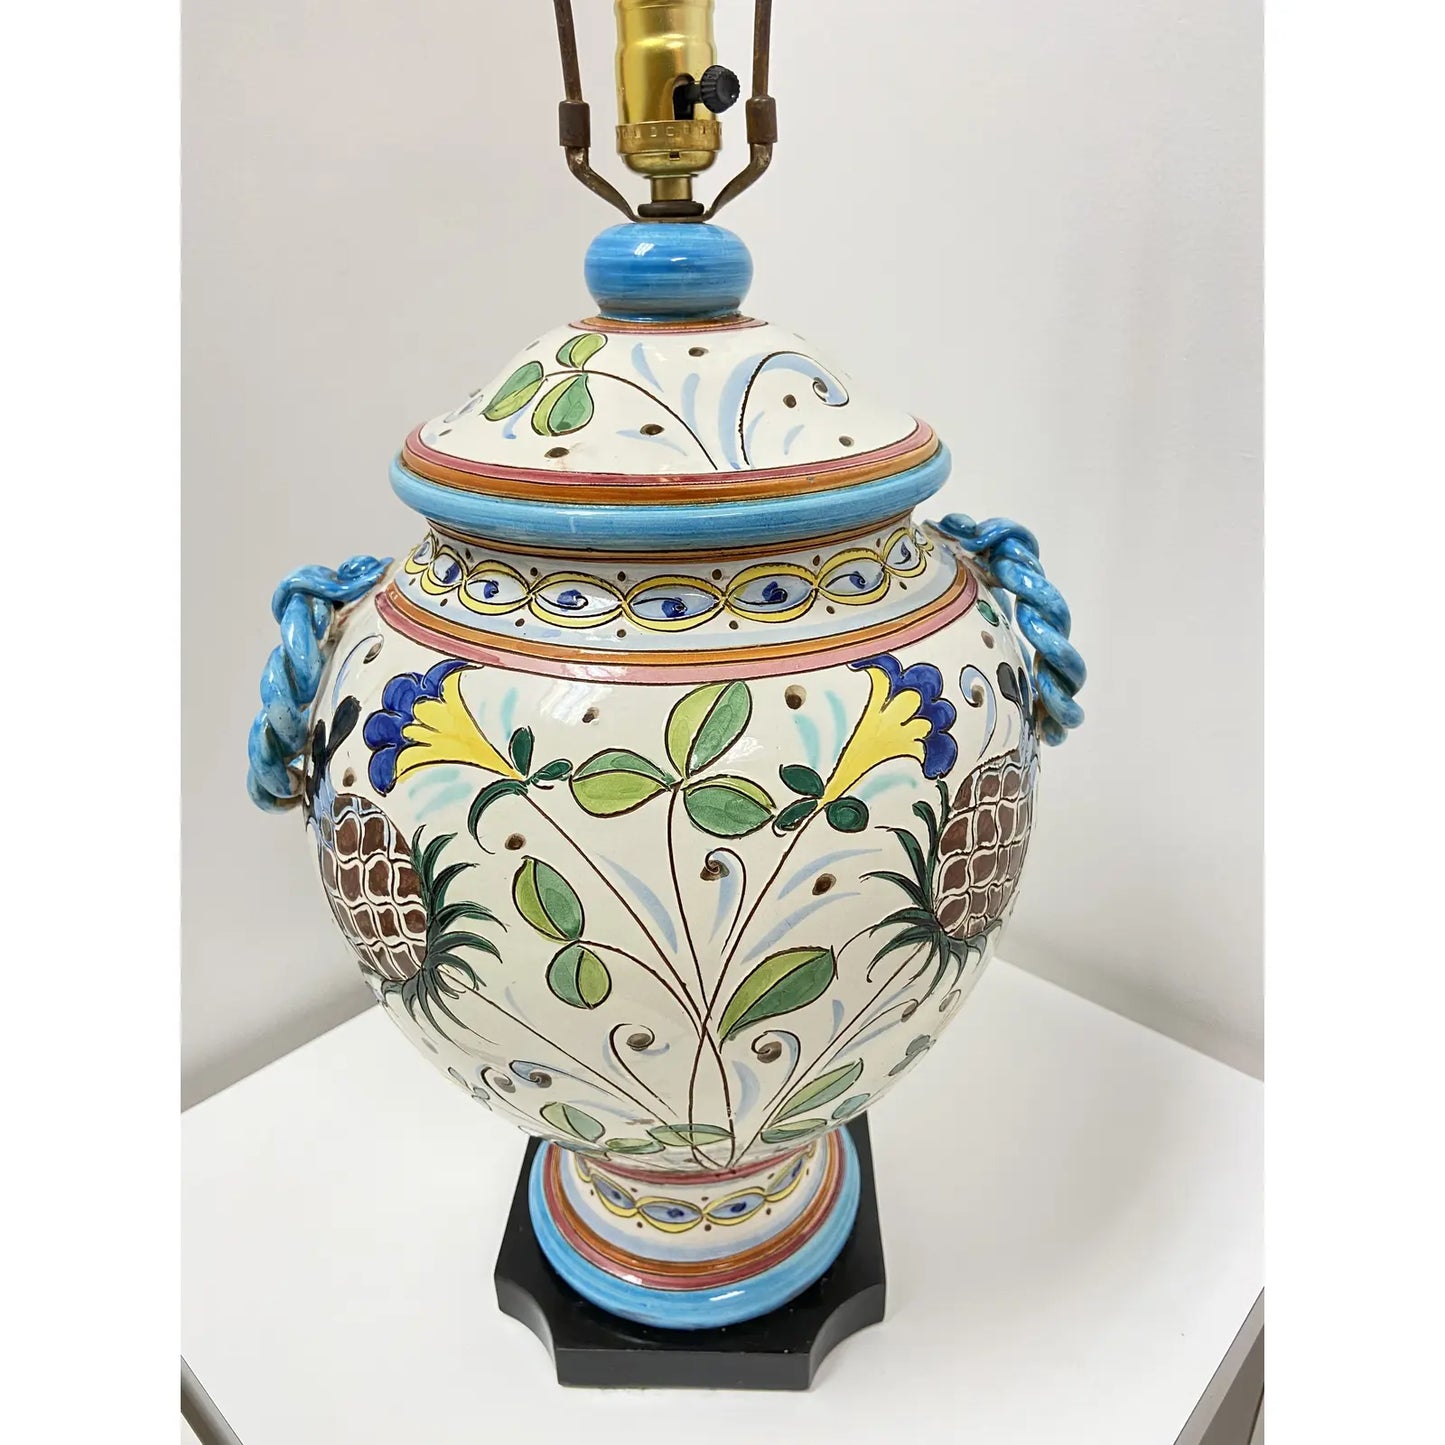 URN SHAPED MAJOLICA POTTERY LAMP FROM DERUTA, ITALY